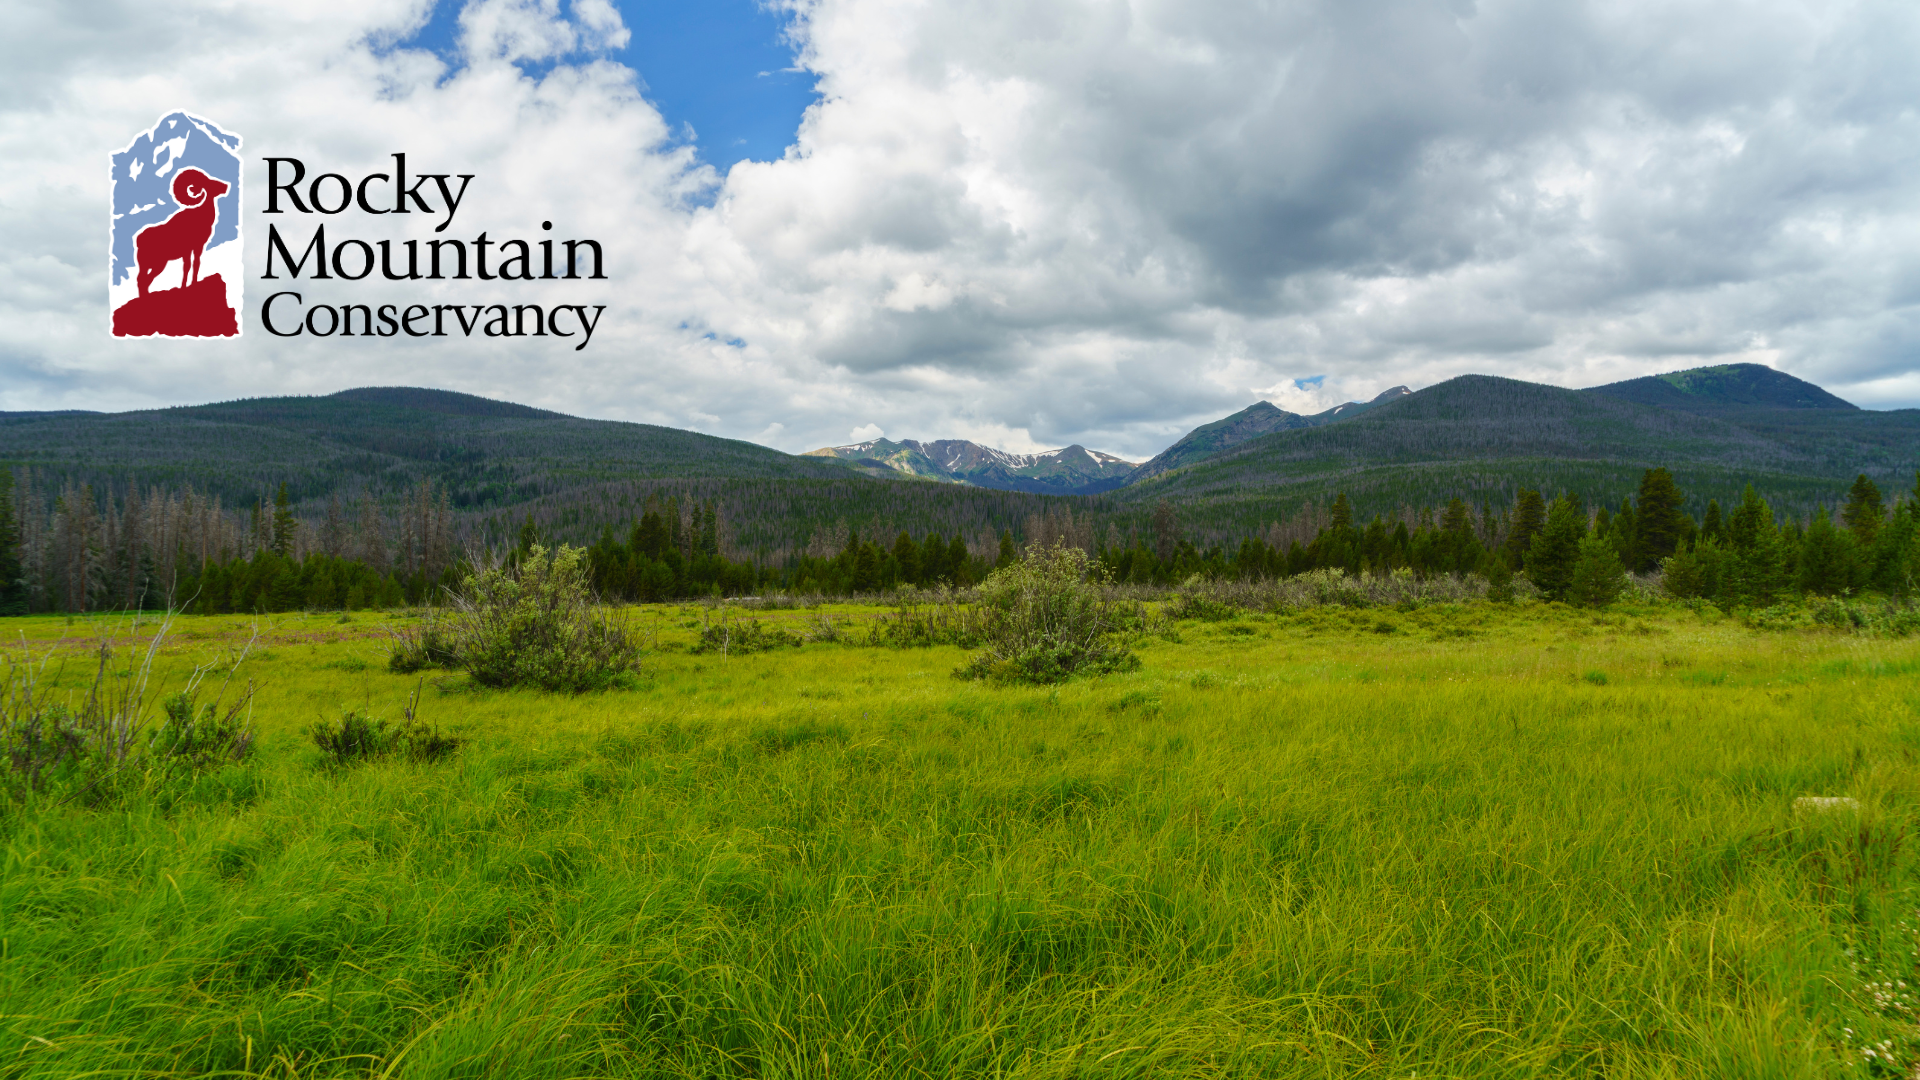 A vast green meadow with mountains in the background under a cloudy sky. "Rocky Mountain Conservancy" logo is in the top left corner of the image.